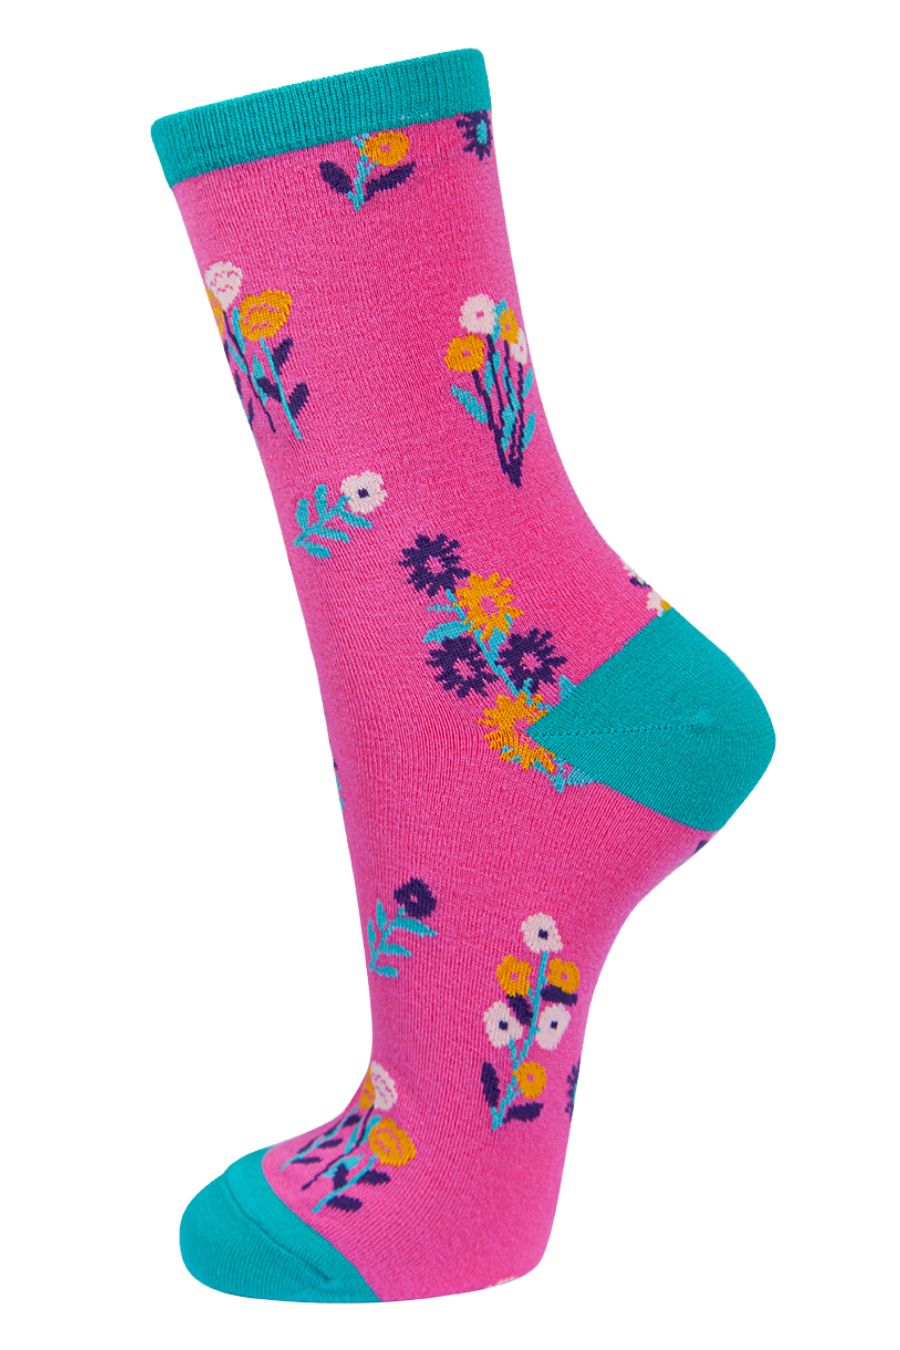 pink and teal bamboo socks with a multicoloured ditsy floral pattern